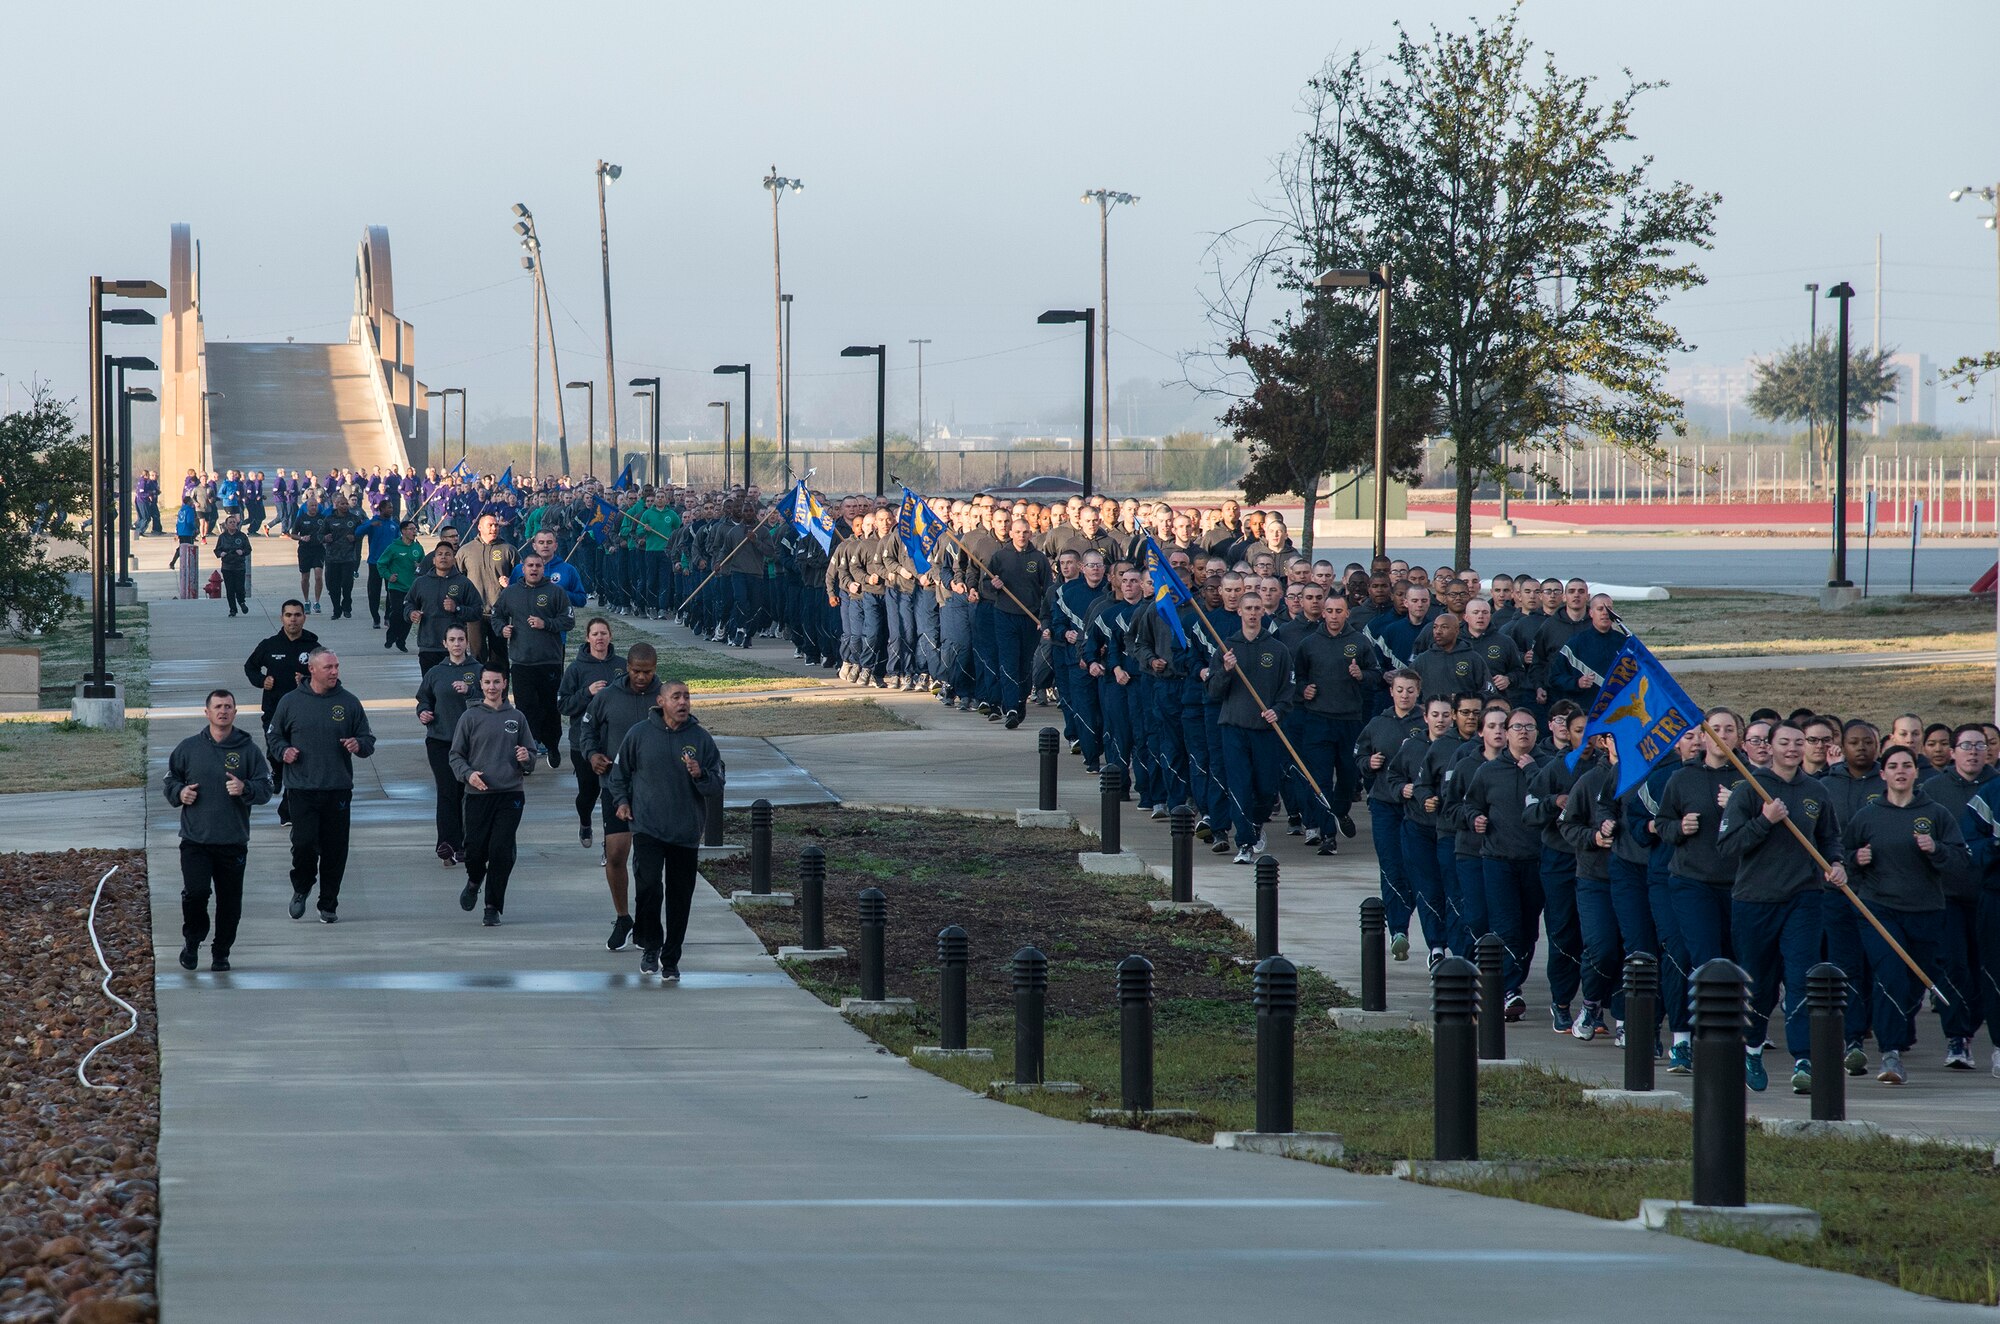 433rd Training Squadron military training instructors (left) call out cadence and encourage their trainees (right) during the pre-basic military training graduation Airmen’s run at Joint Base San Antonio-Lackland, Texas Dec. 13. (U.S. Air Force photo by Johnny Saldivar)